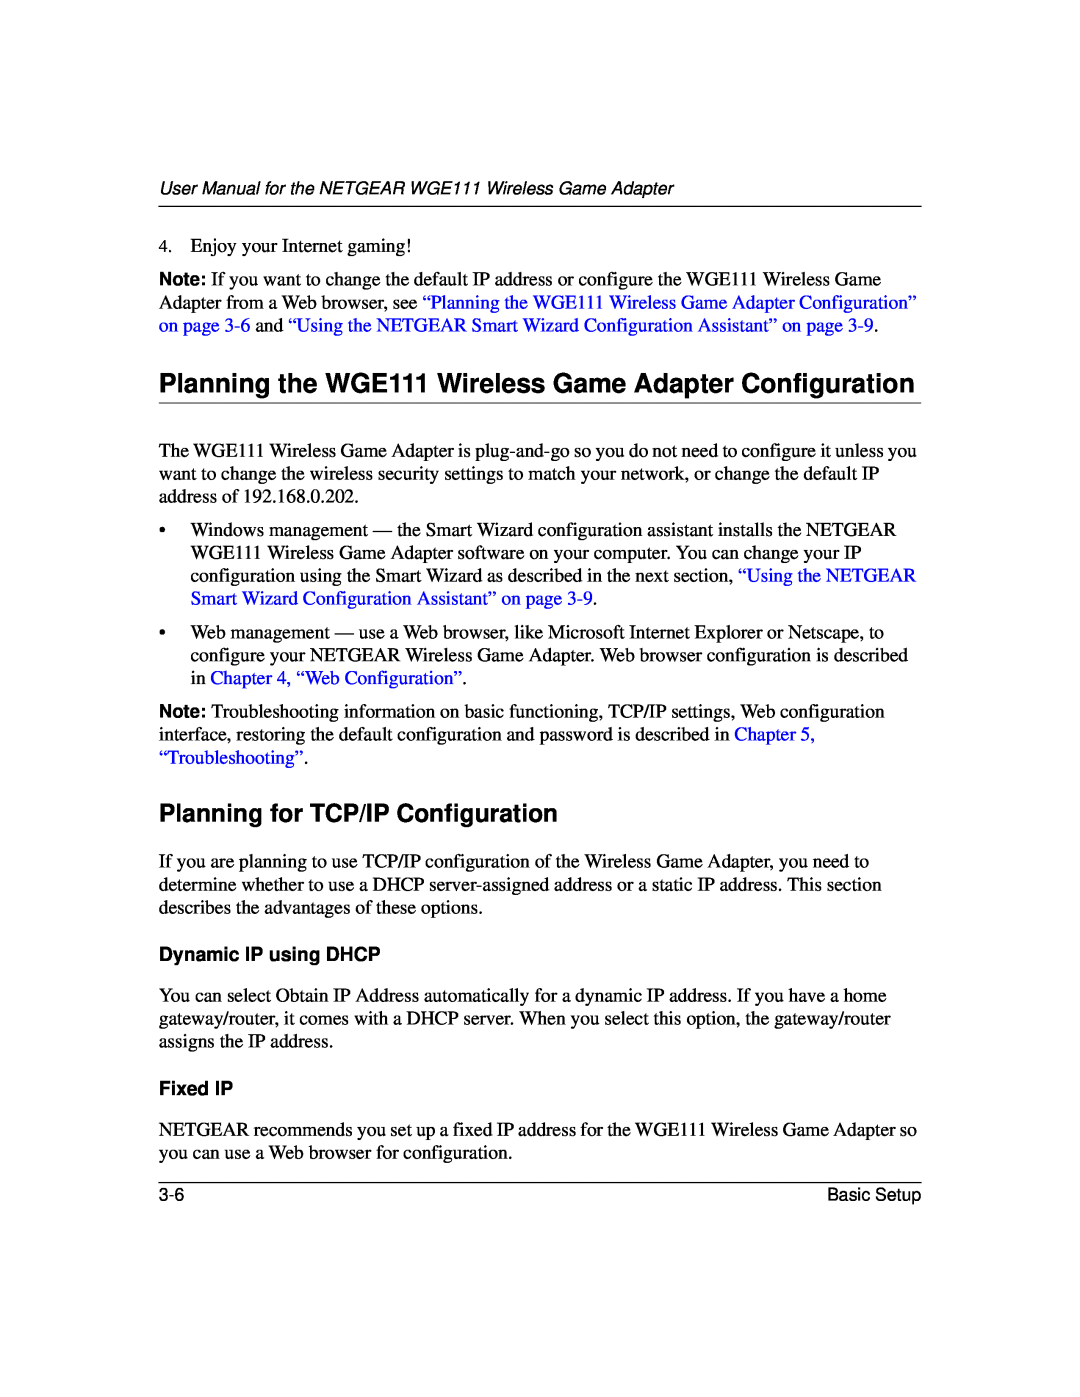 NETGEAR user manual Planning the WGE111 Wireless Game Adapter Configuration, Planning for TCP/IP Configuration, Fixed IP 